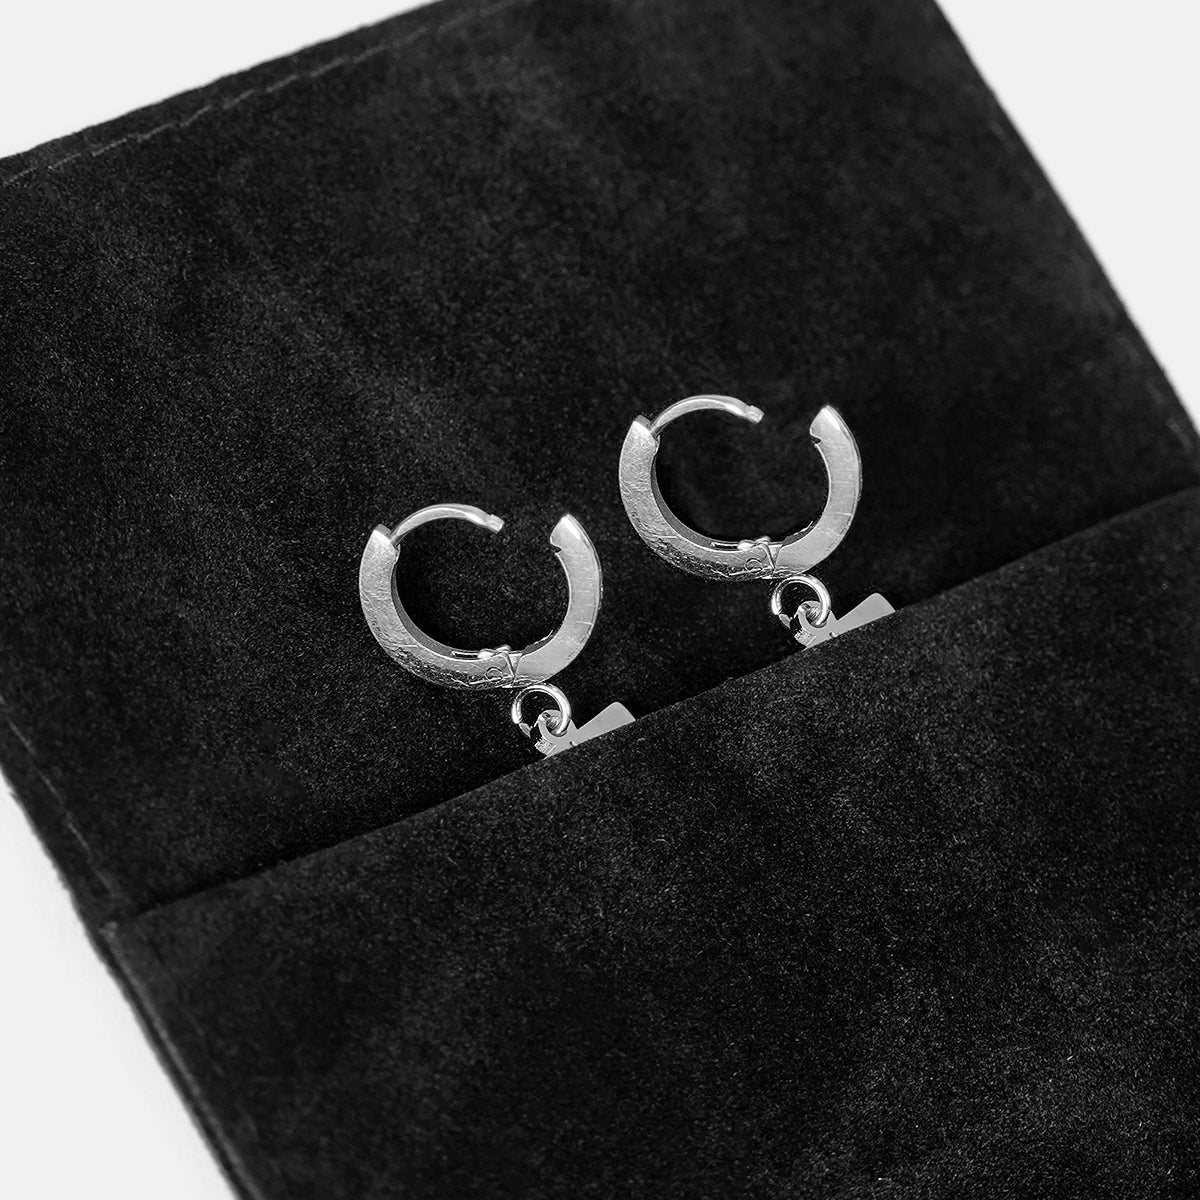 59 Number Earring - Stainless Steel